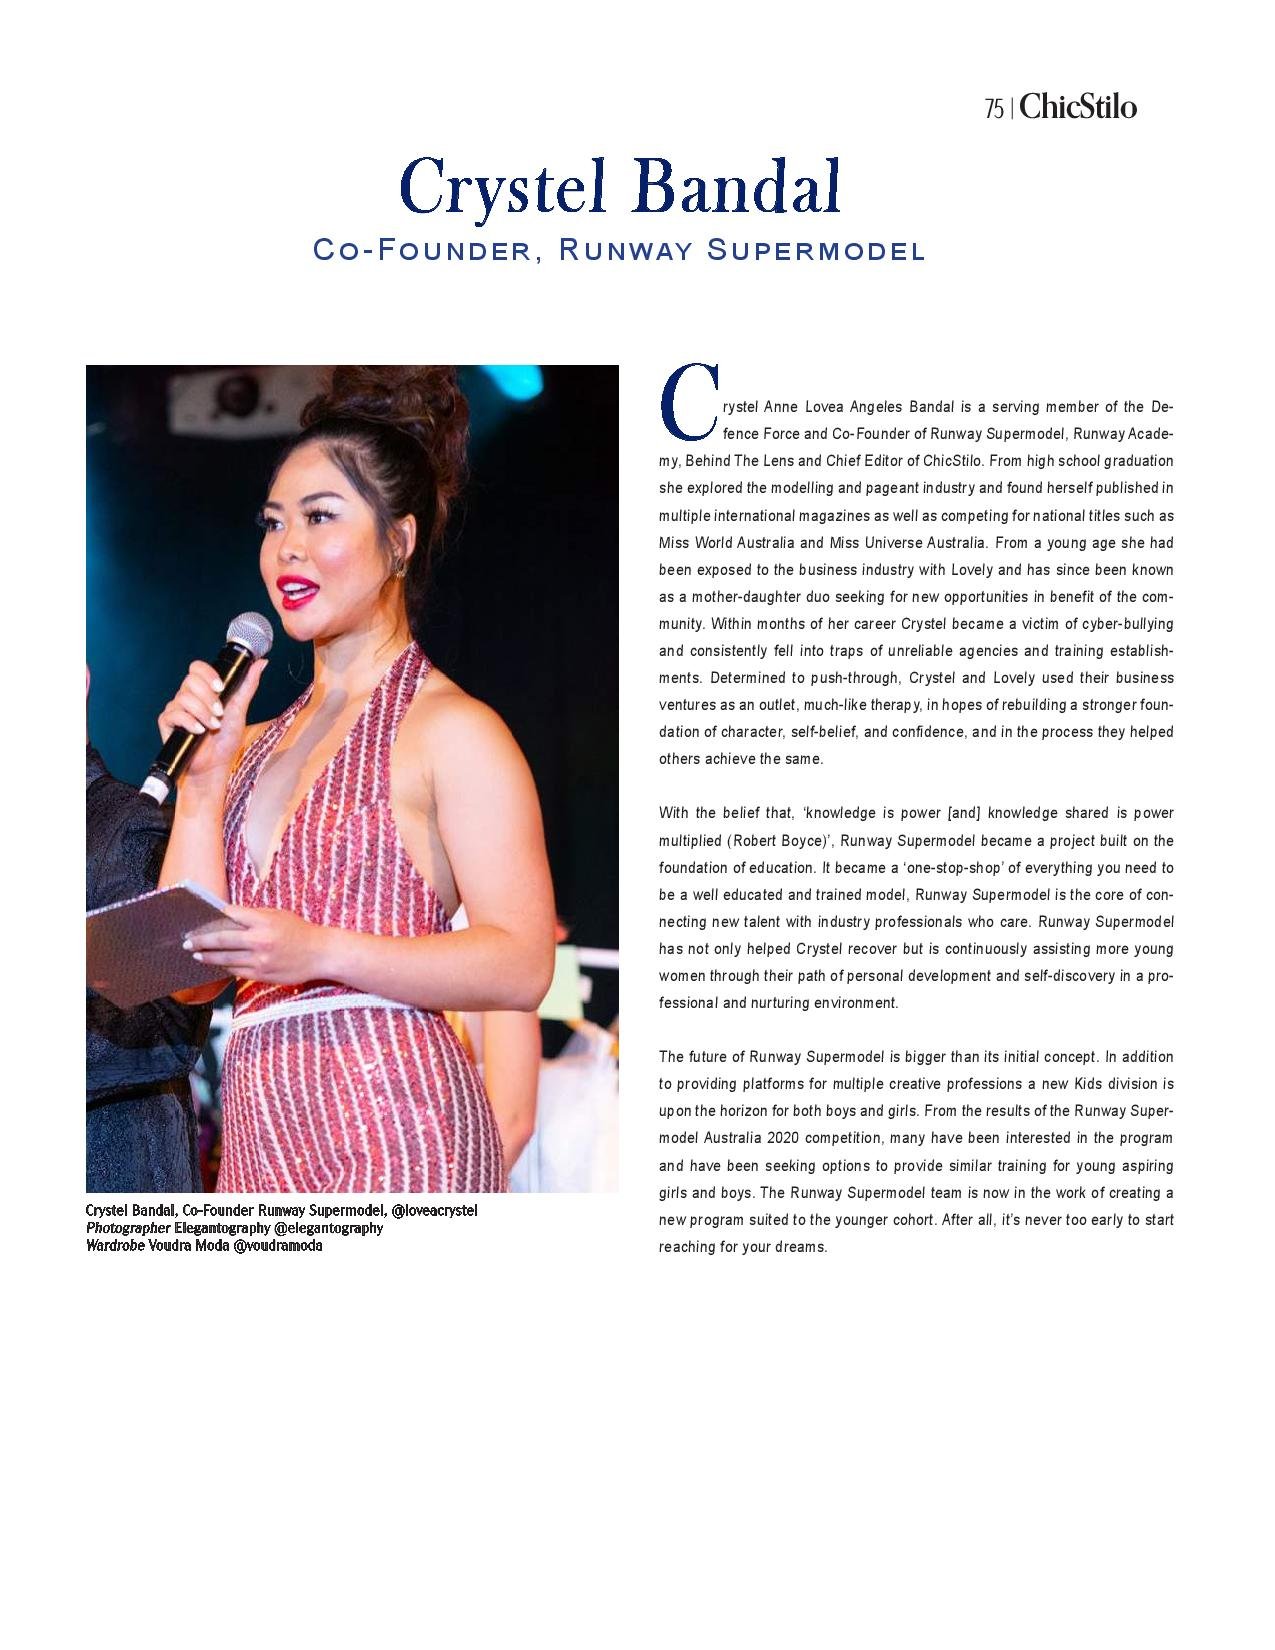 ChicStilo Special Edition-page-075.jpg